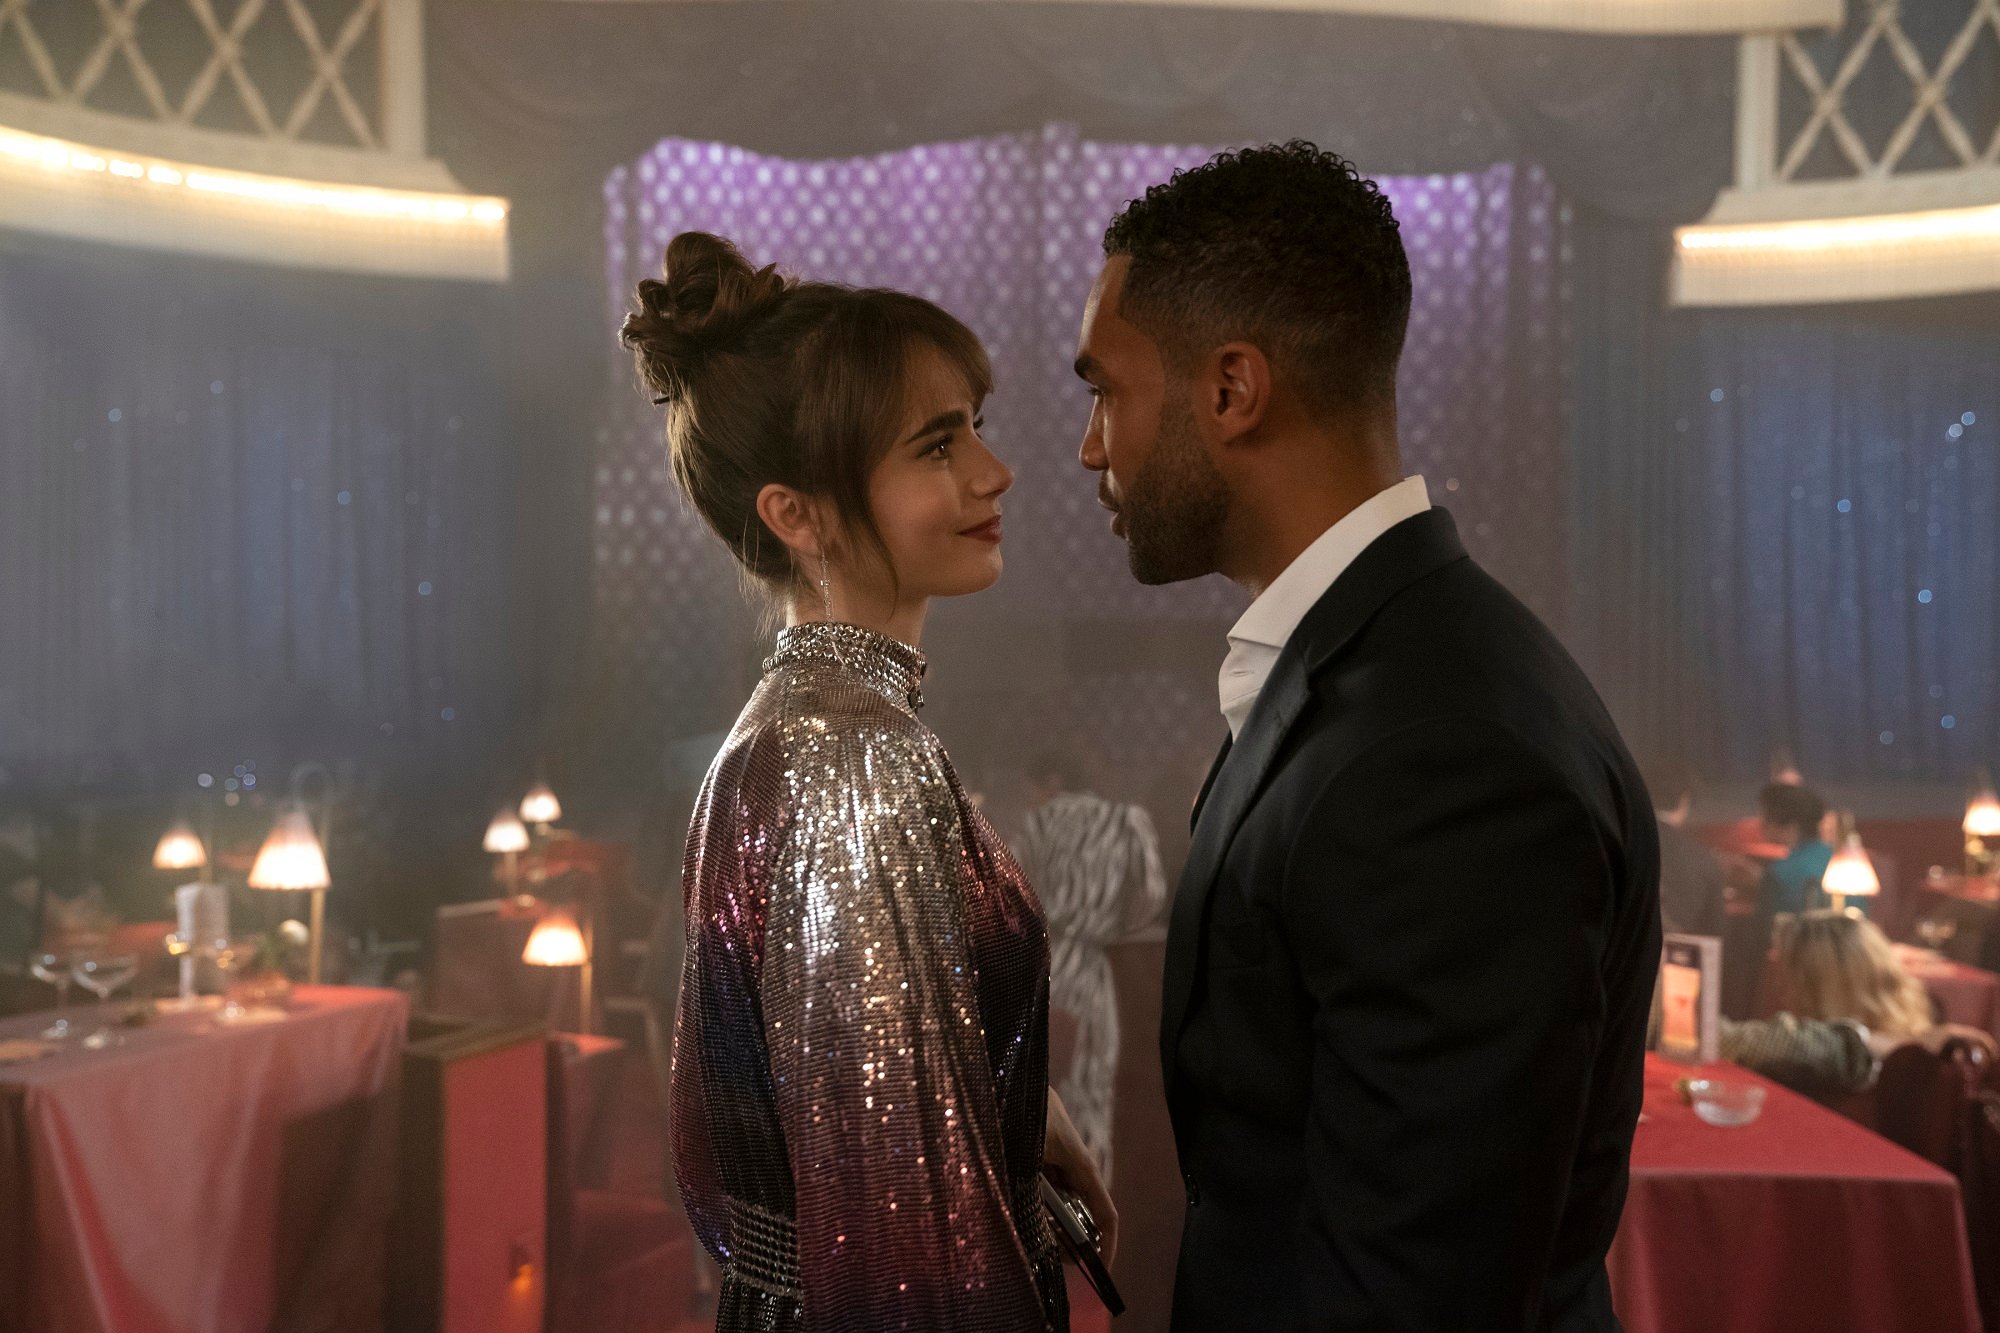 'Emily in Paris' Season 3: Lily Collins as Emily, and Lucien Laviscount as Alfie looking each other in the eyes